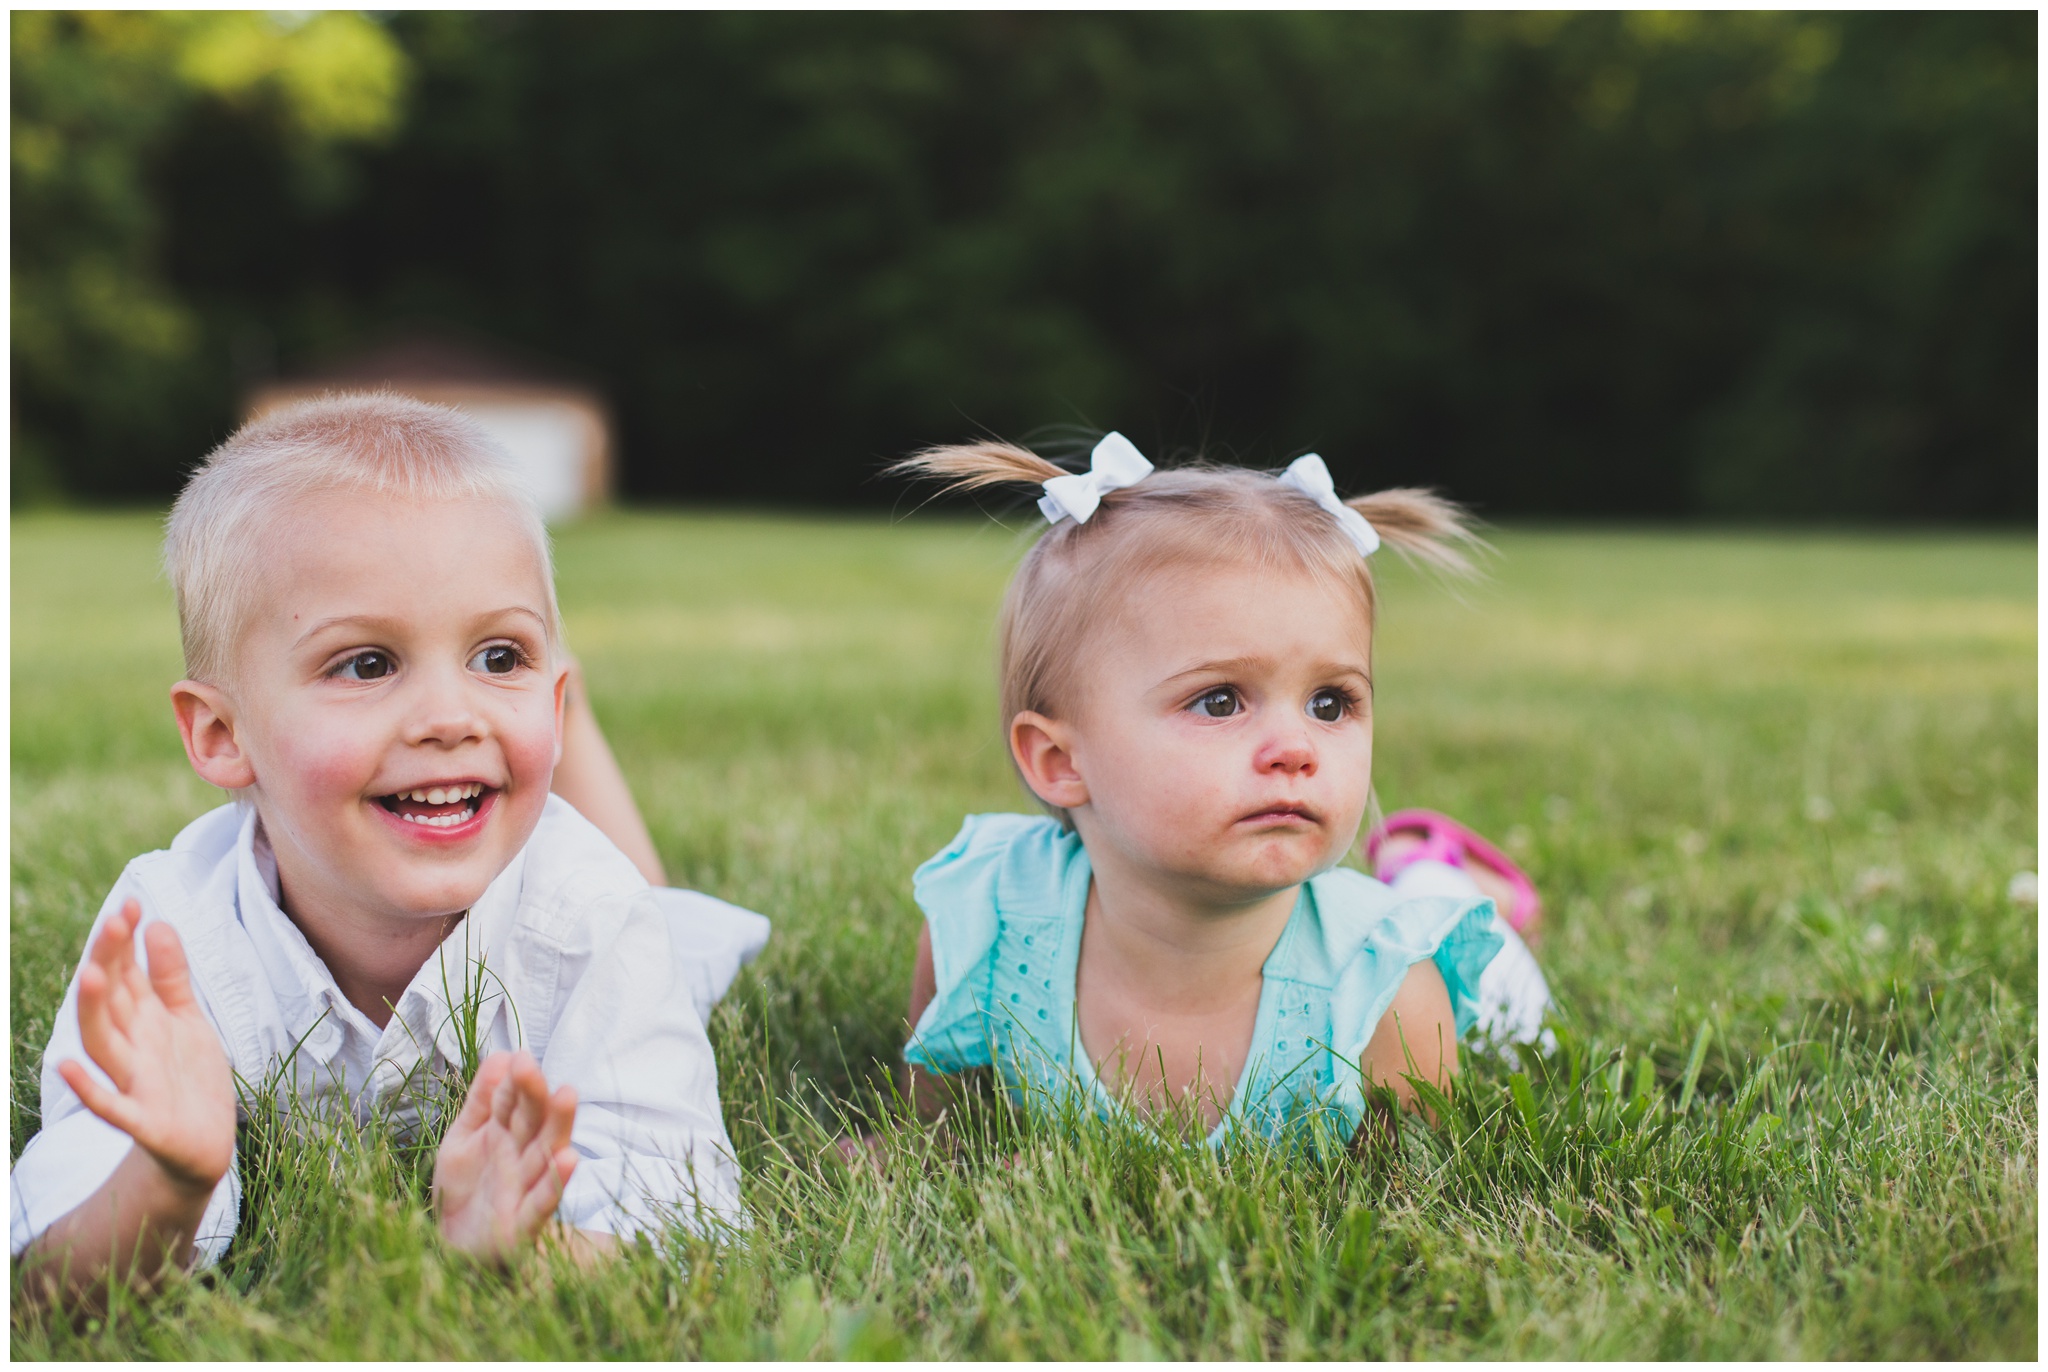 Potters Bridge Park family session in Noblesville, Indiana